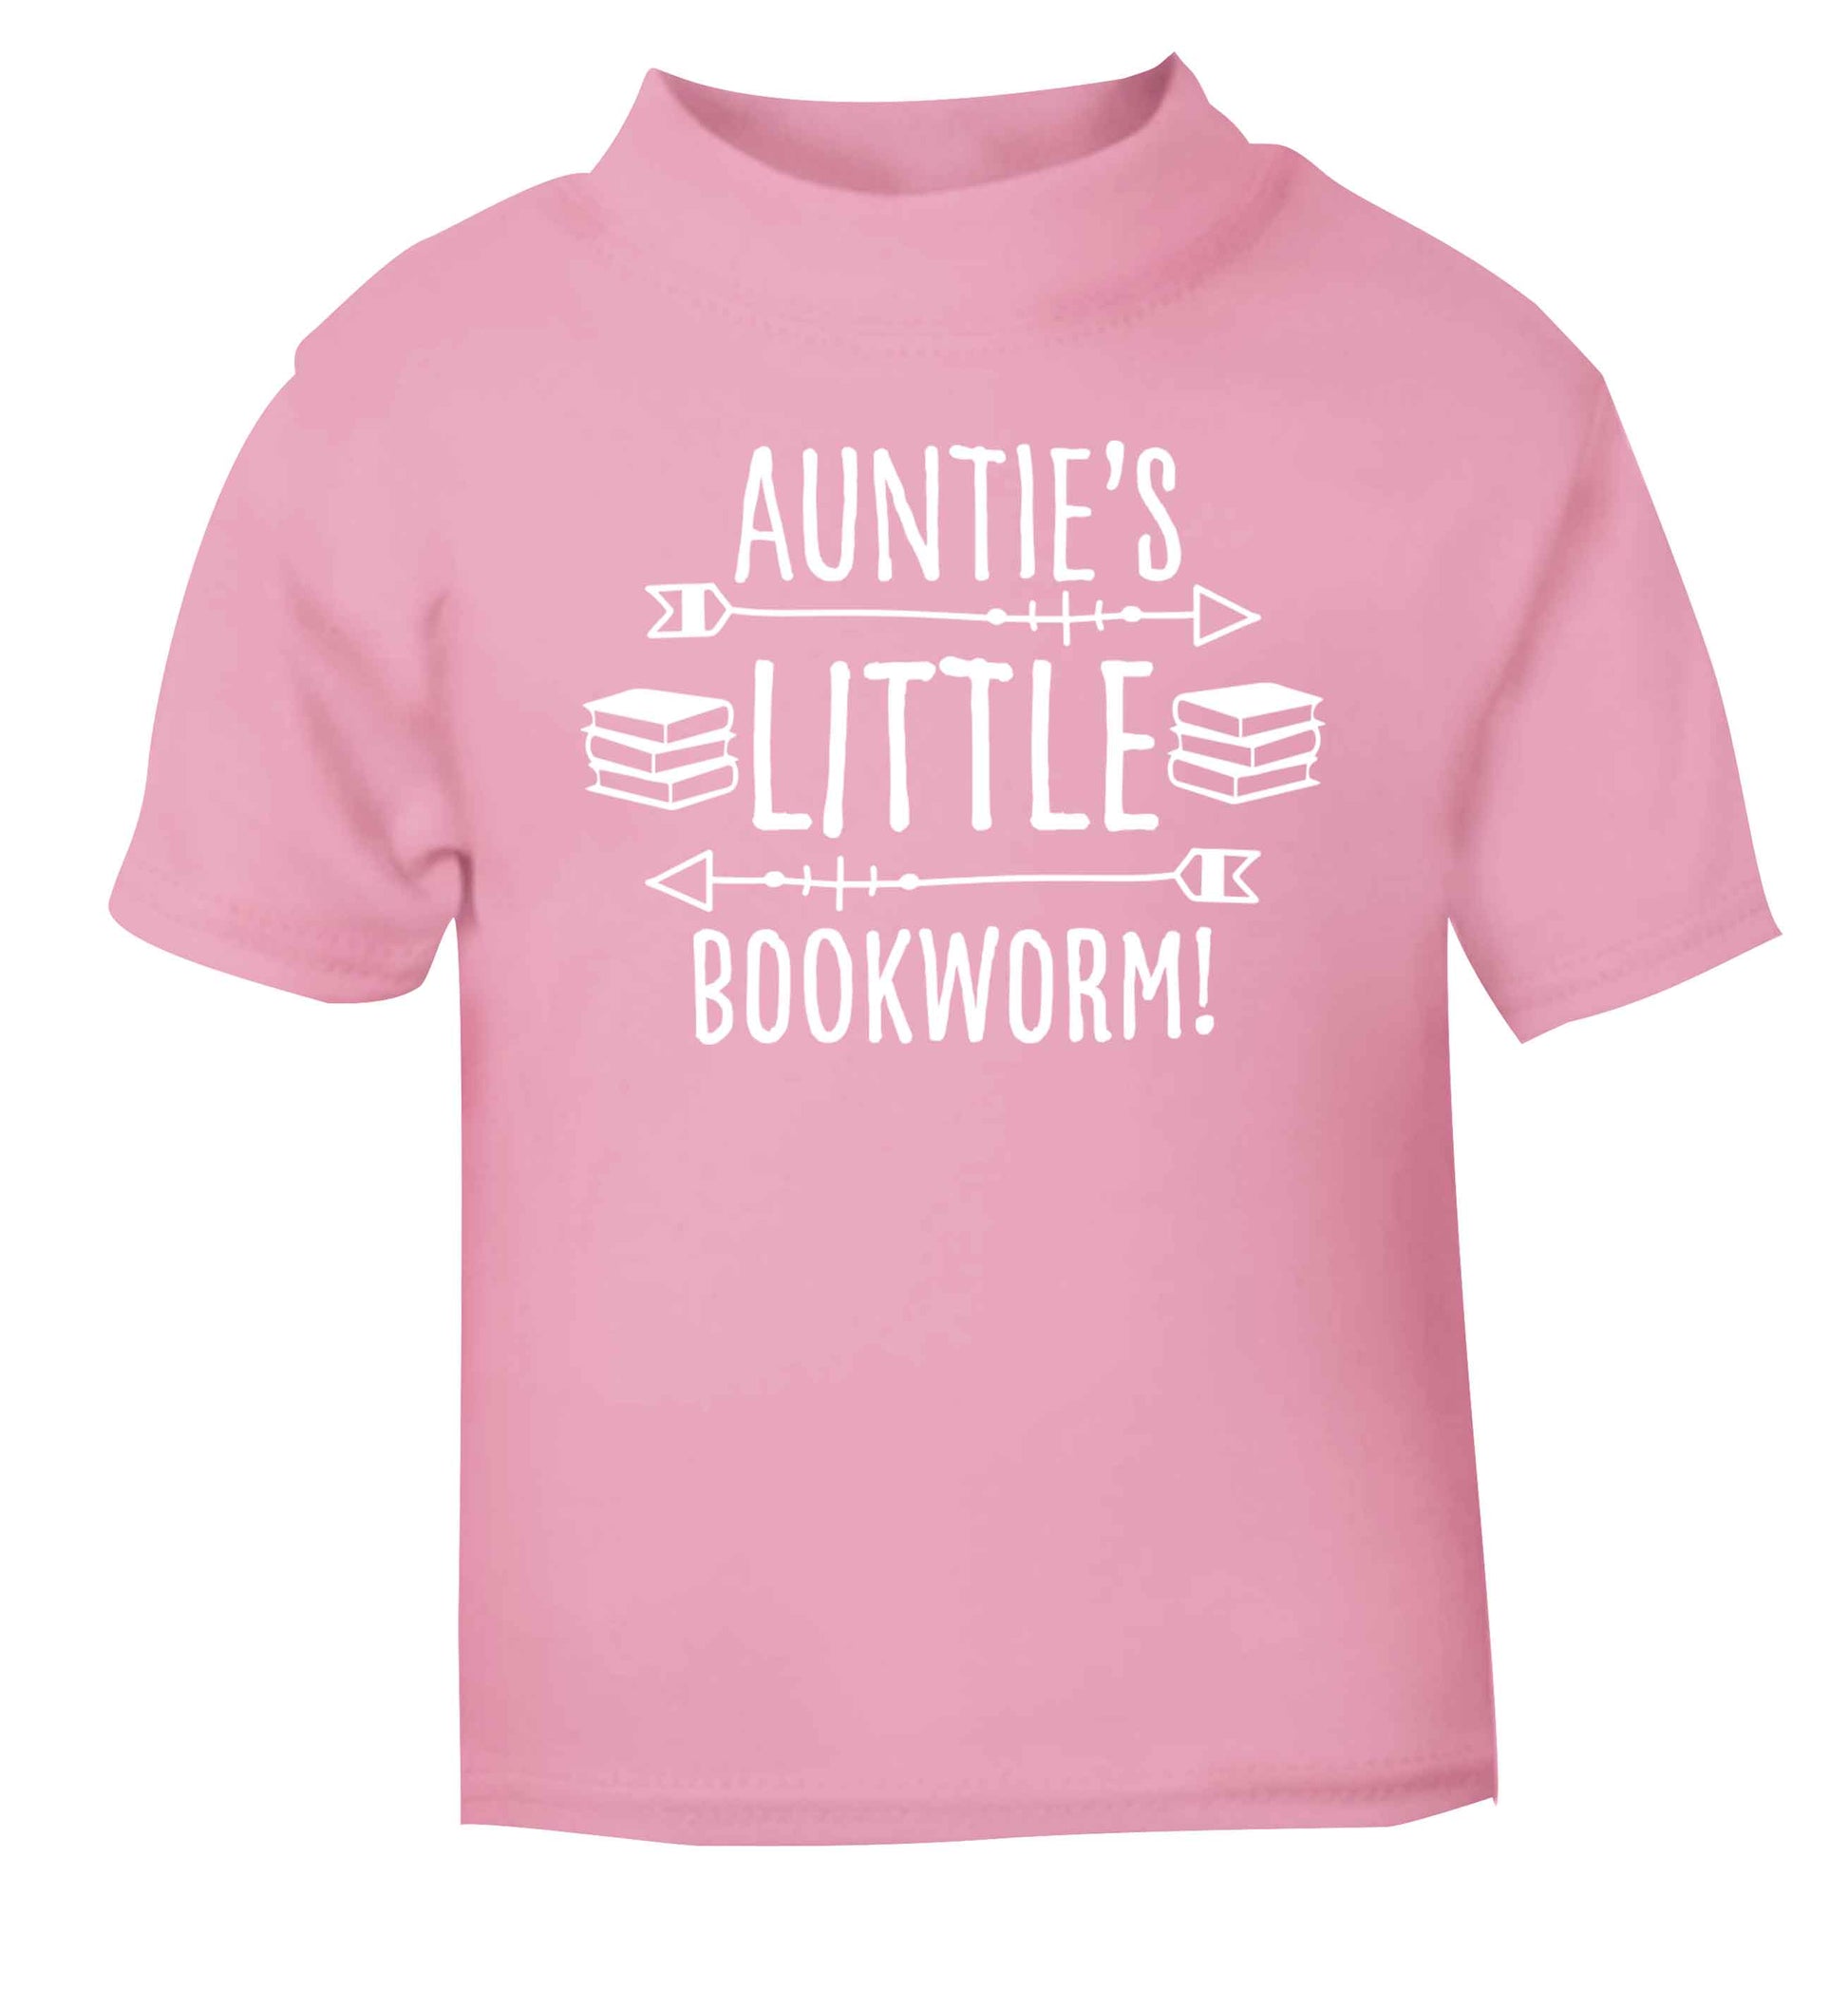 Auntie's little bookworm light pink baby toddler Tshirt 2 Years